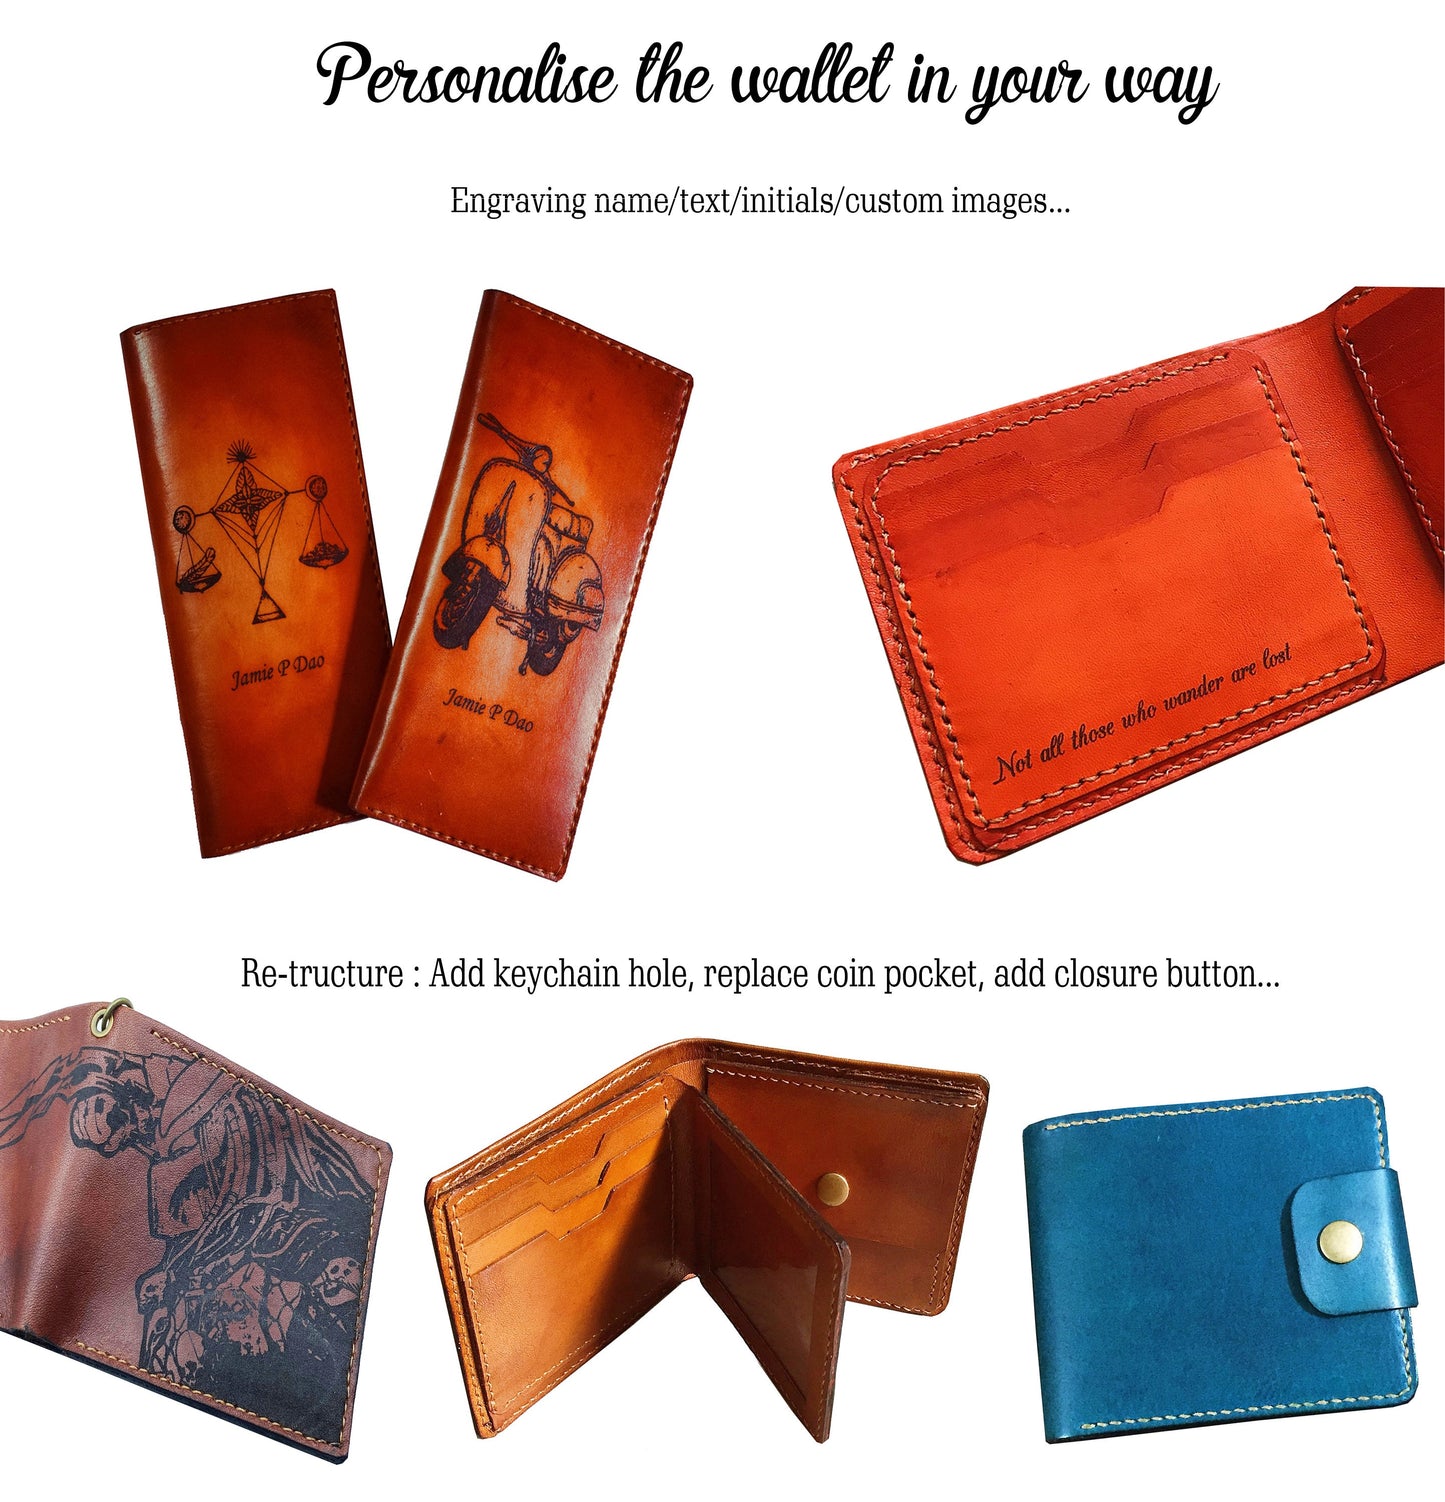 Personalized Rhino animal wallet, tattoo style men's gift, leather men's wallet, custom engraved wallet, present for dad, birthday gift idea